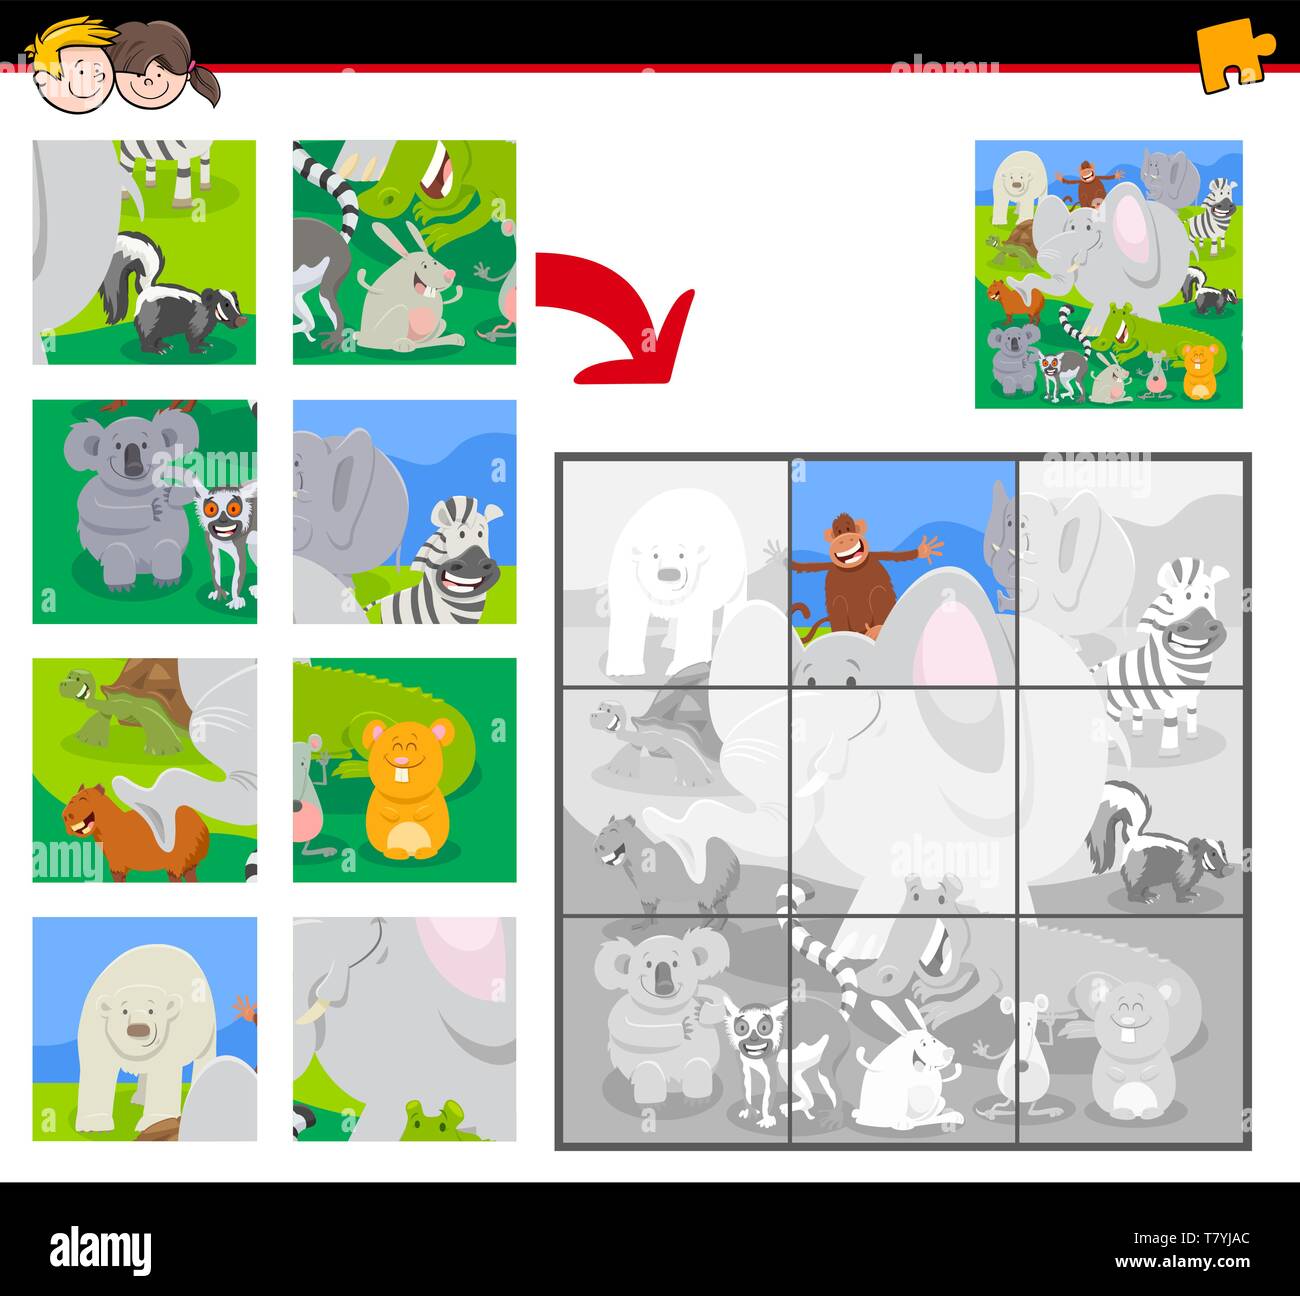 Cartoon Illustration of Educational Jigsaw Puzzle Game for Children with Funny Wild Animals Group Stock Vector